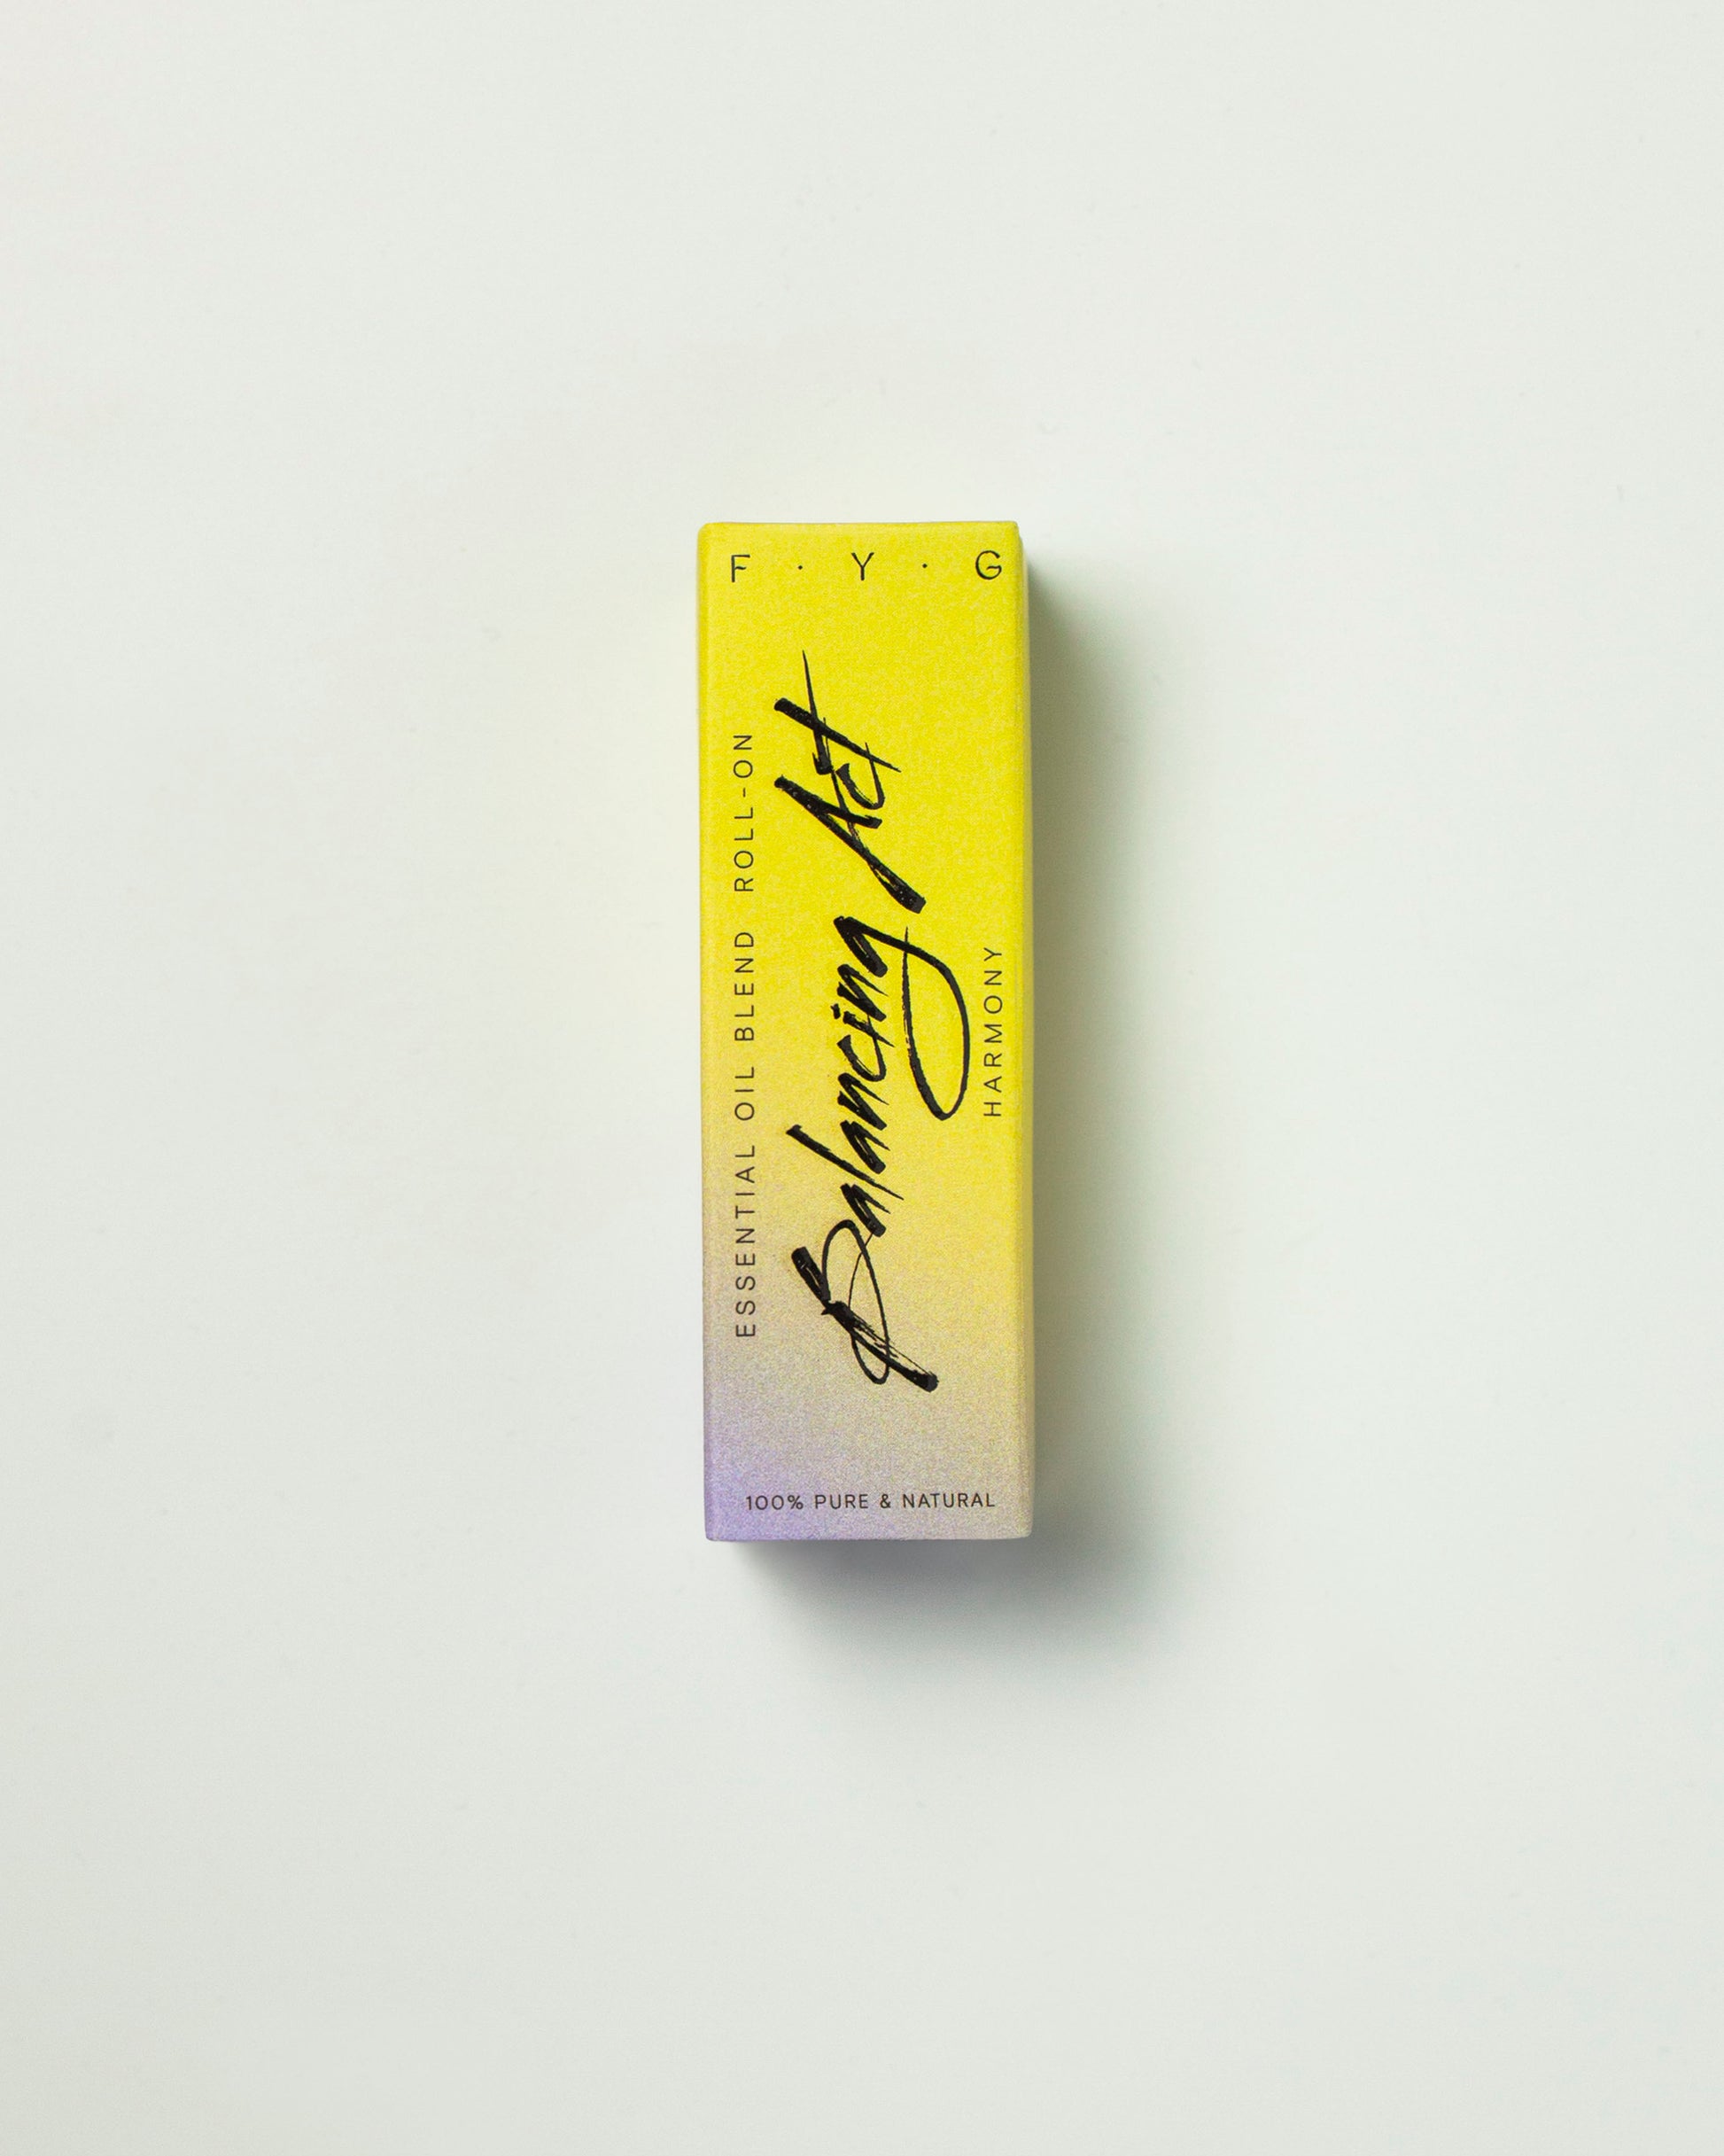 Balancing Act Oil Roll-On - F.Y.G